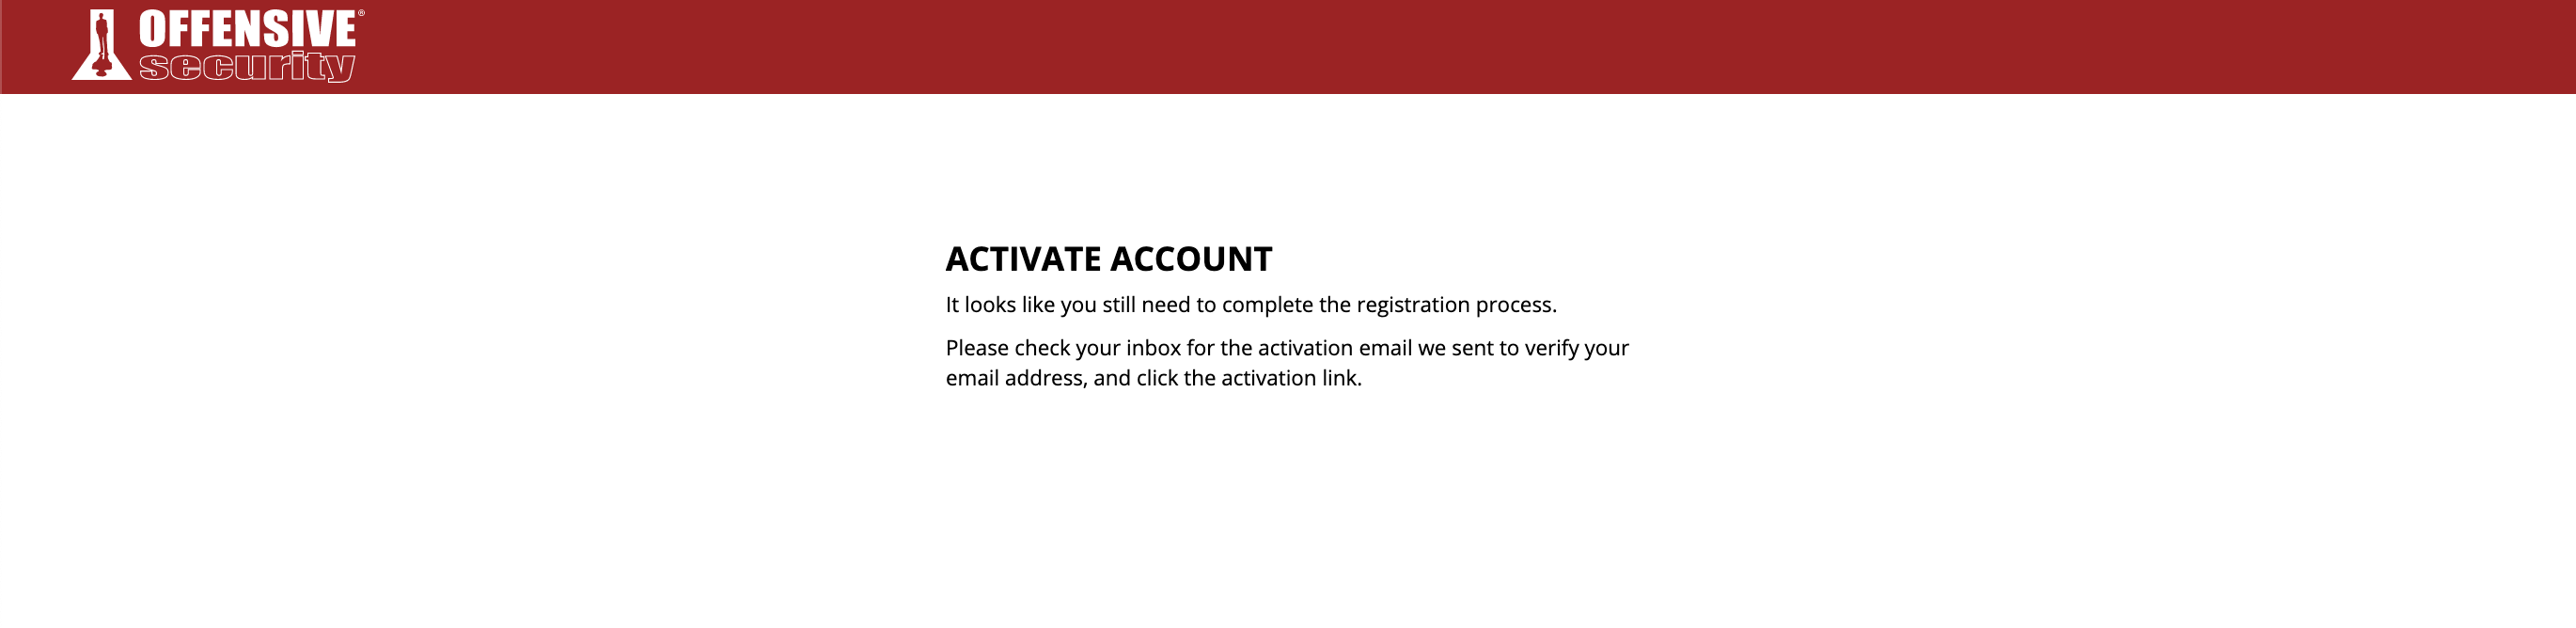 activation_email_was_resent.png